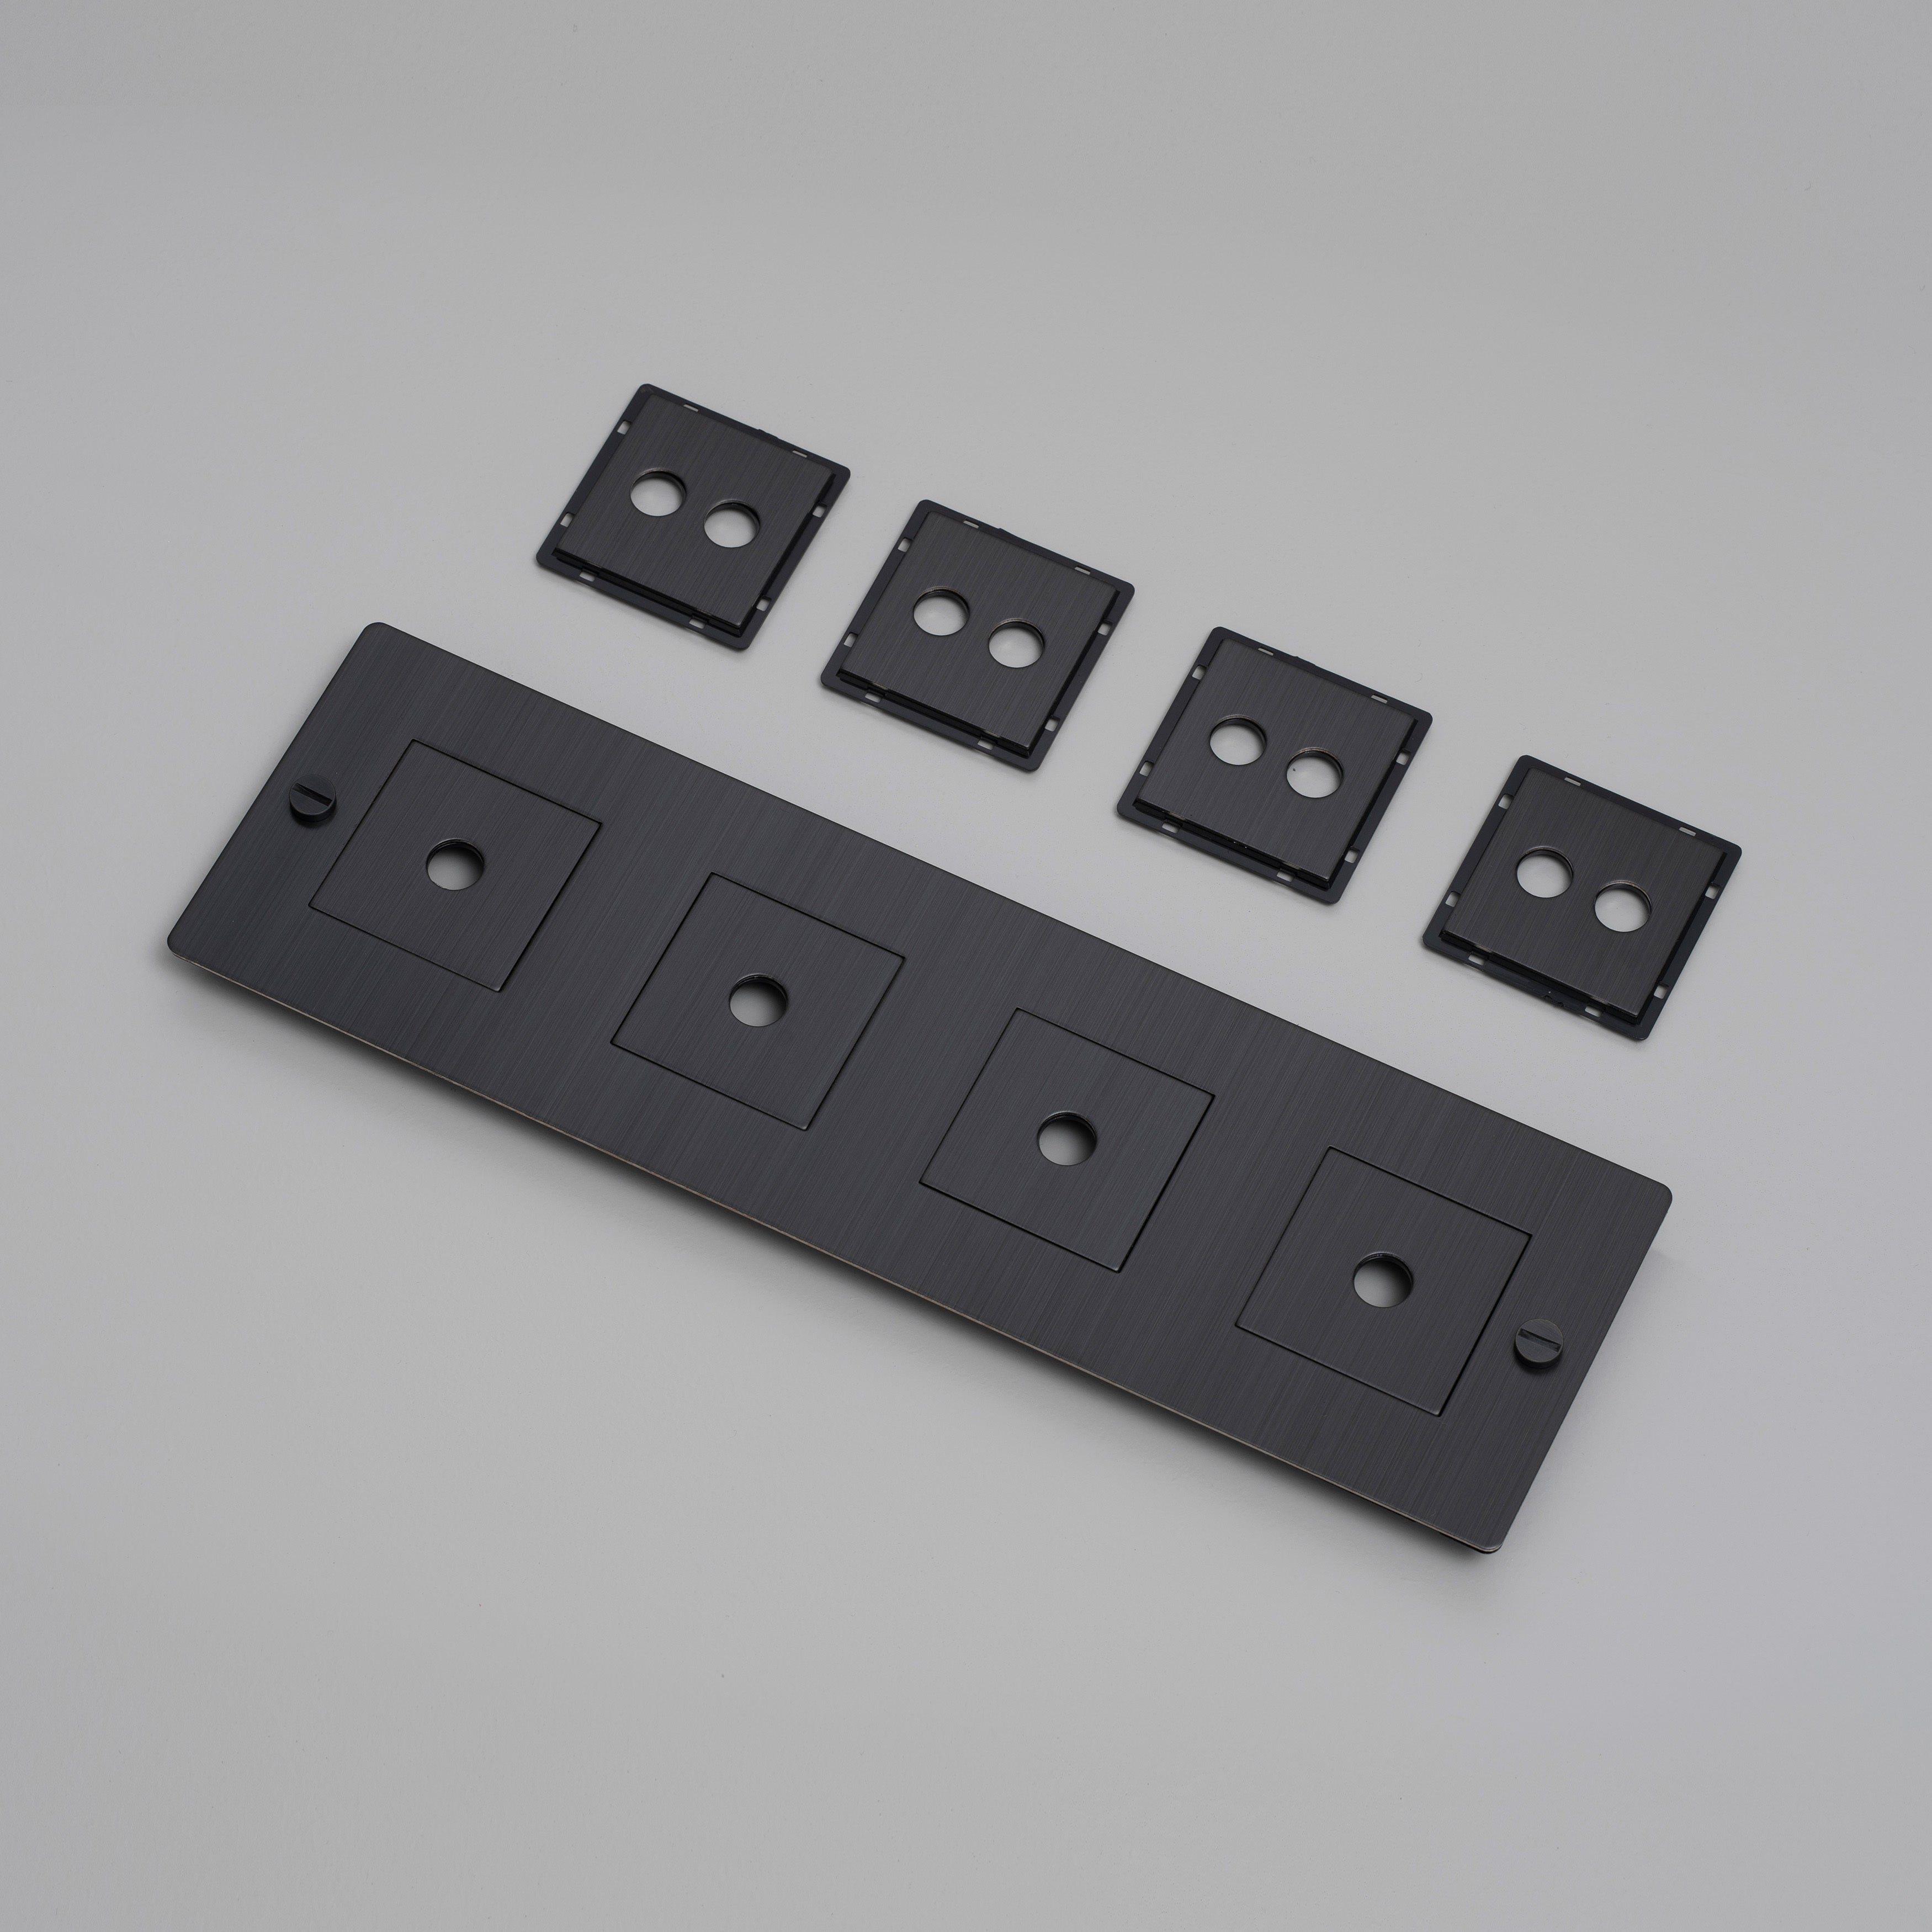 1G/2G wall bracket for dimmers and switches 4-fold